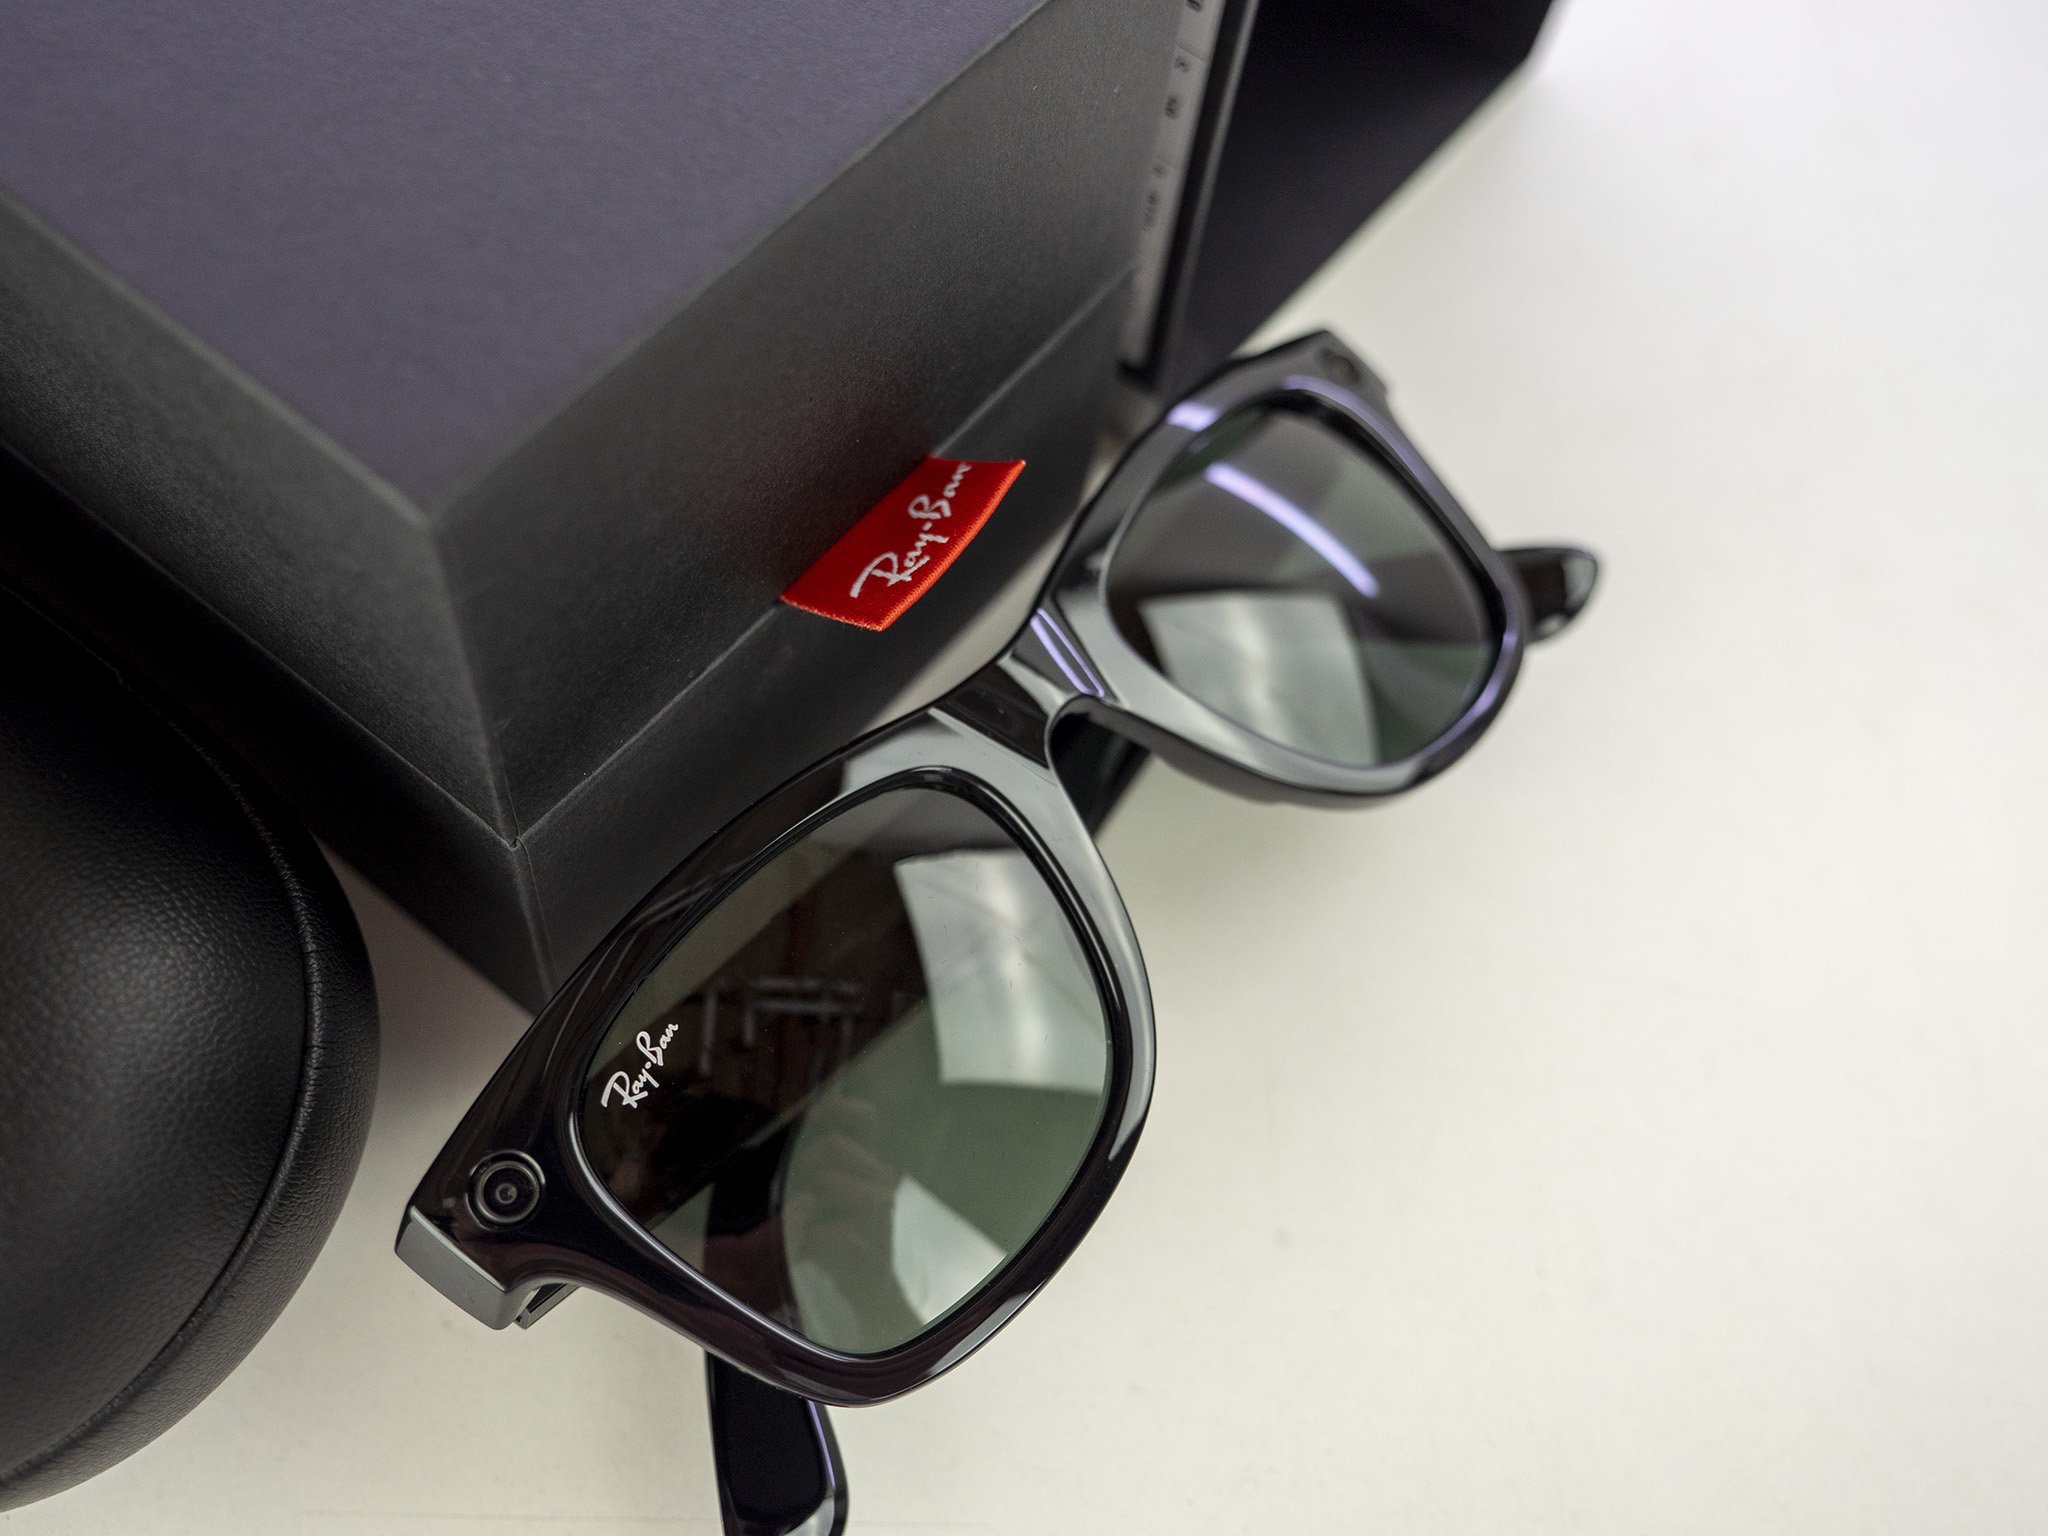 Ray Ban Stories Glasses With Box And Tag